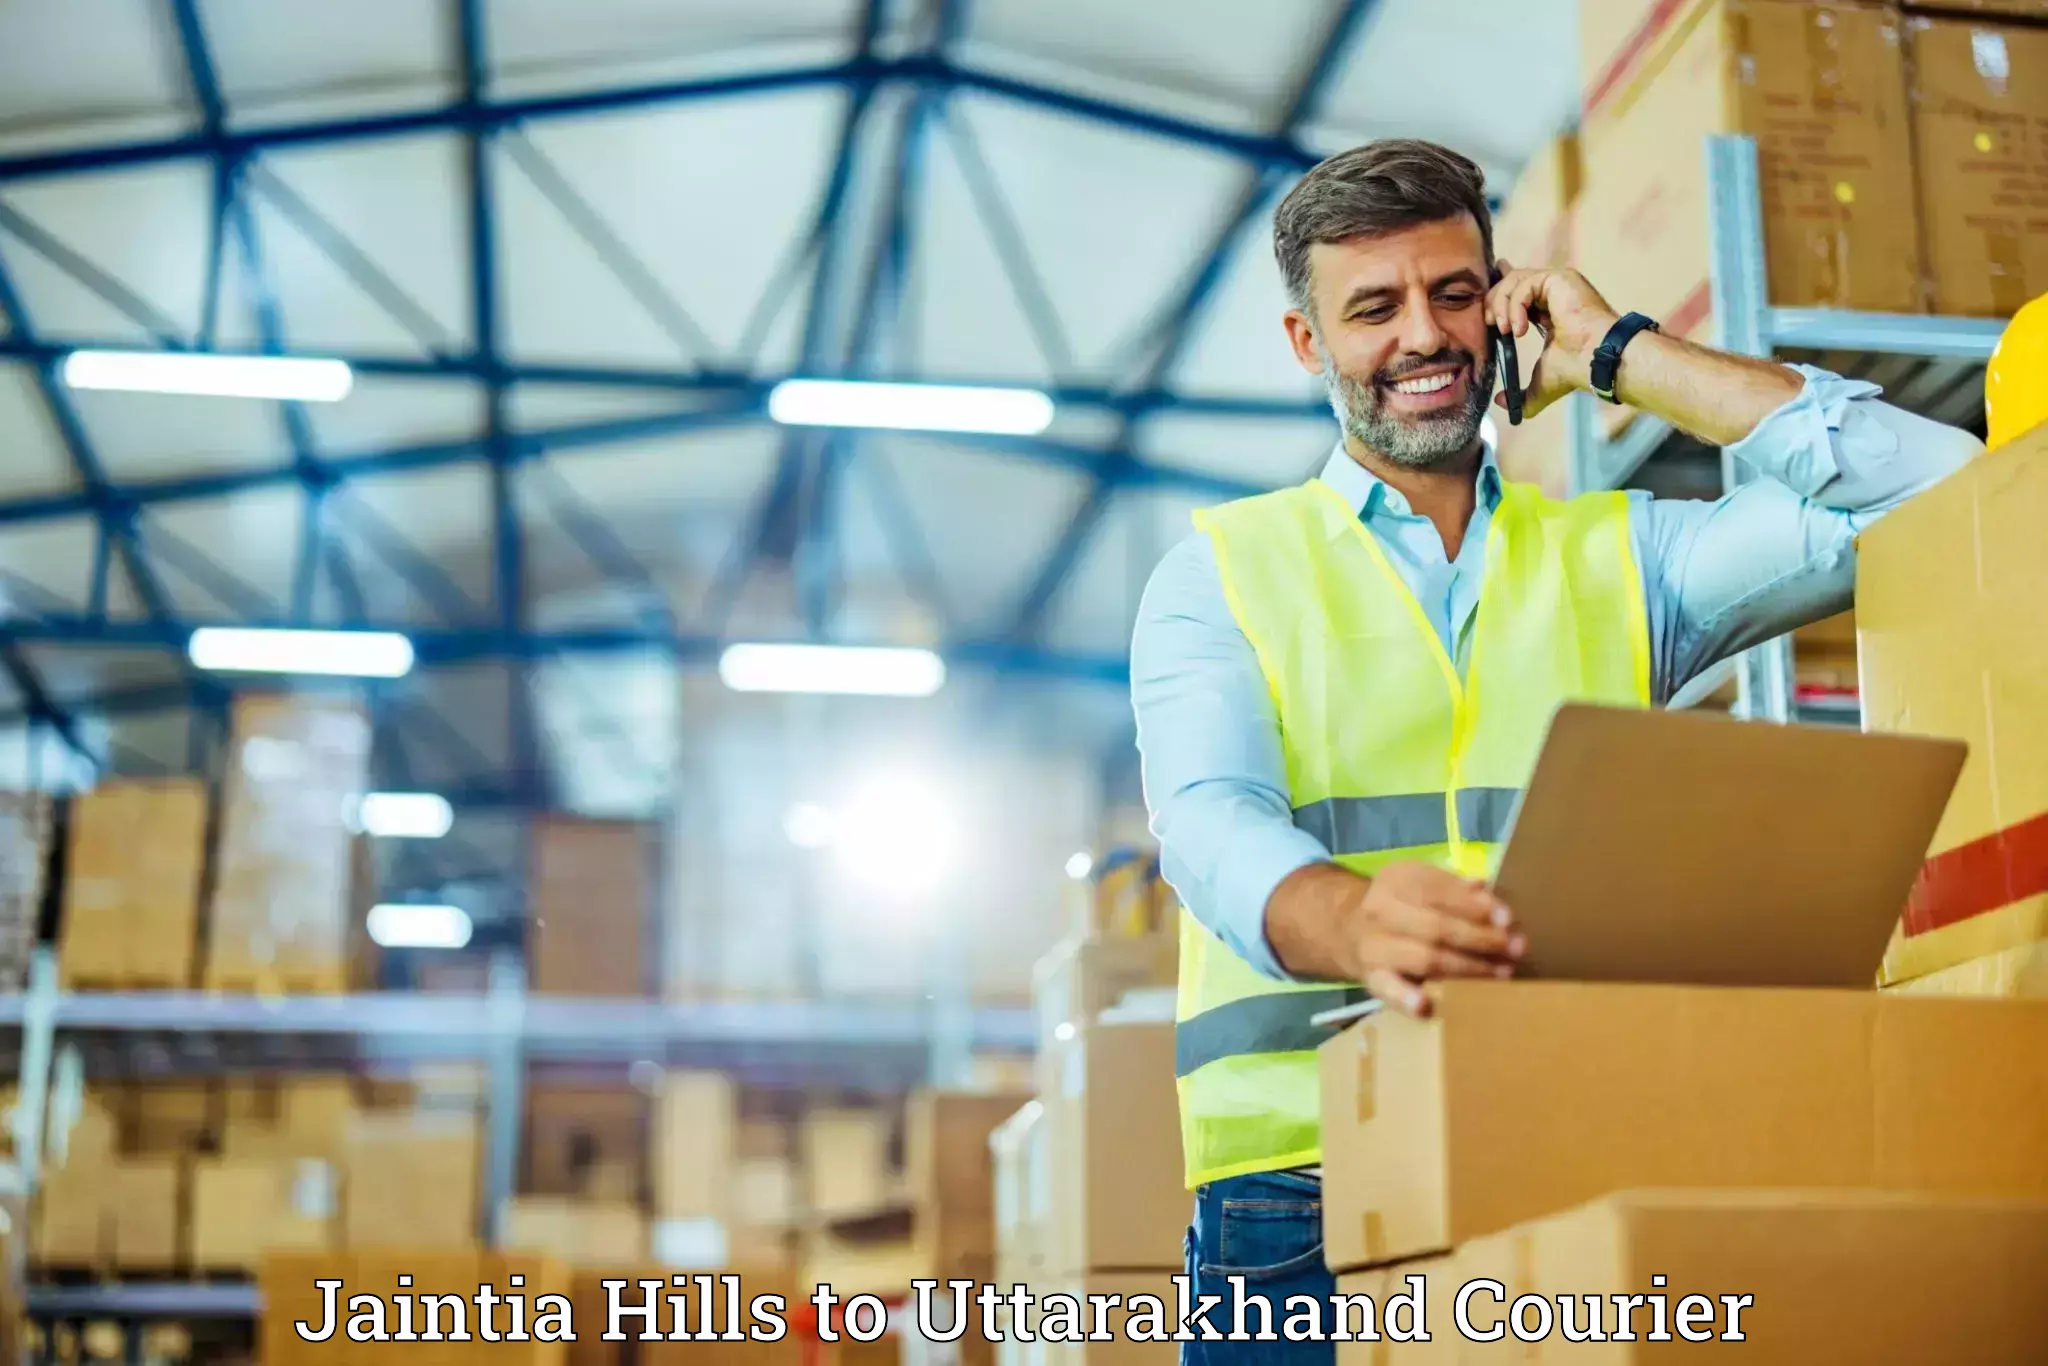 High-quality moving services in Jaintia Hills to Champawat